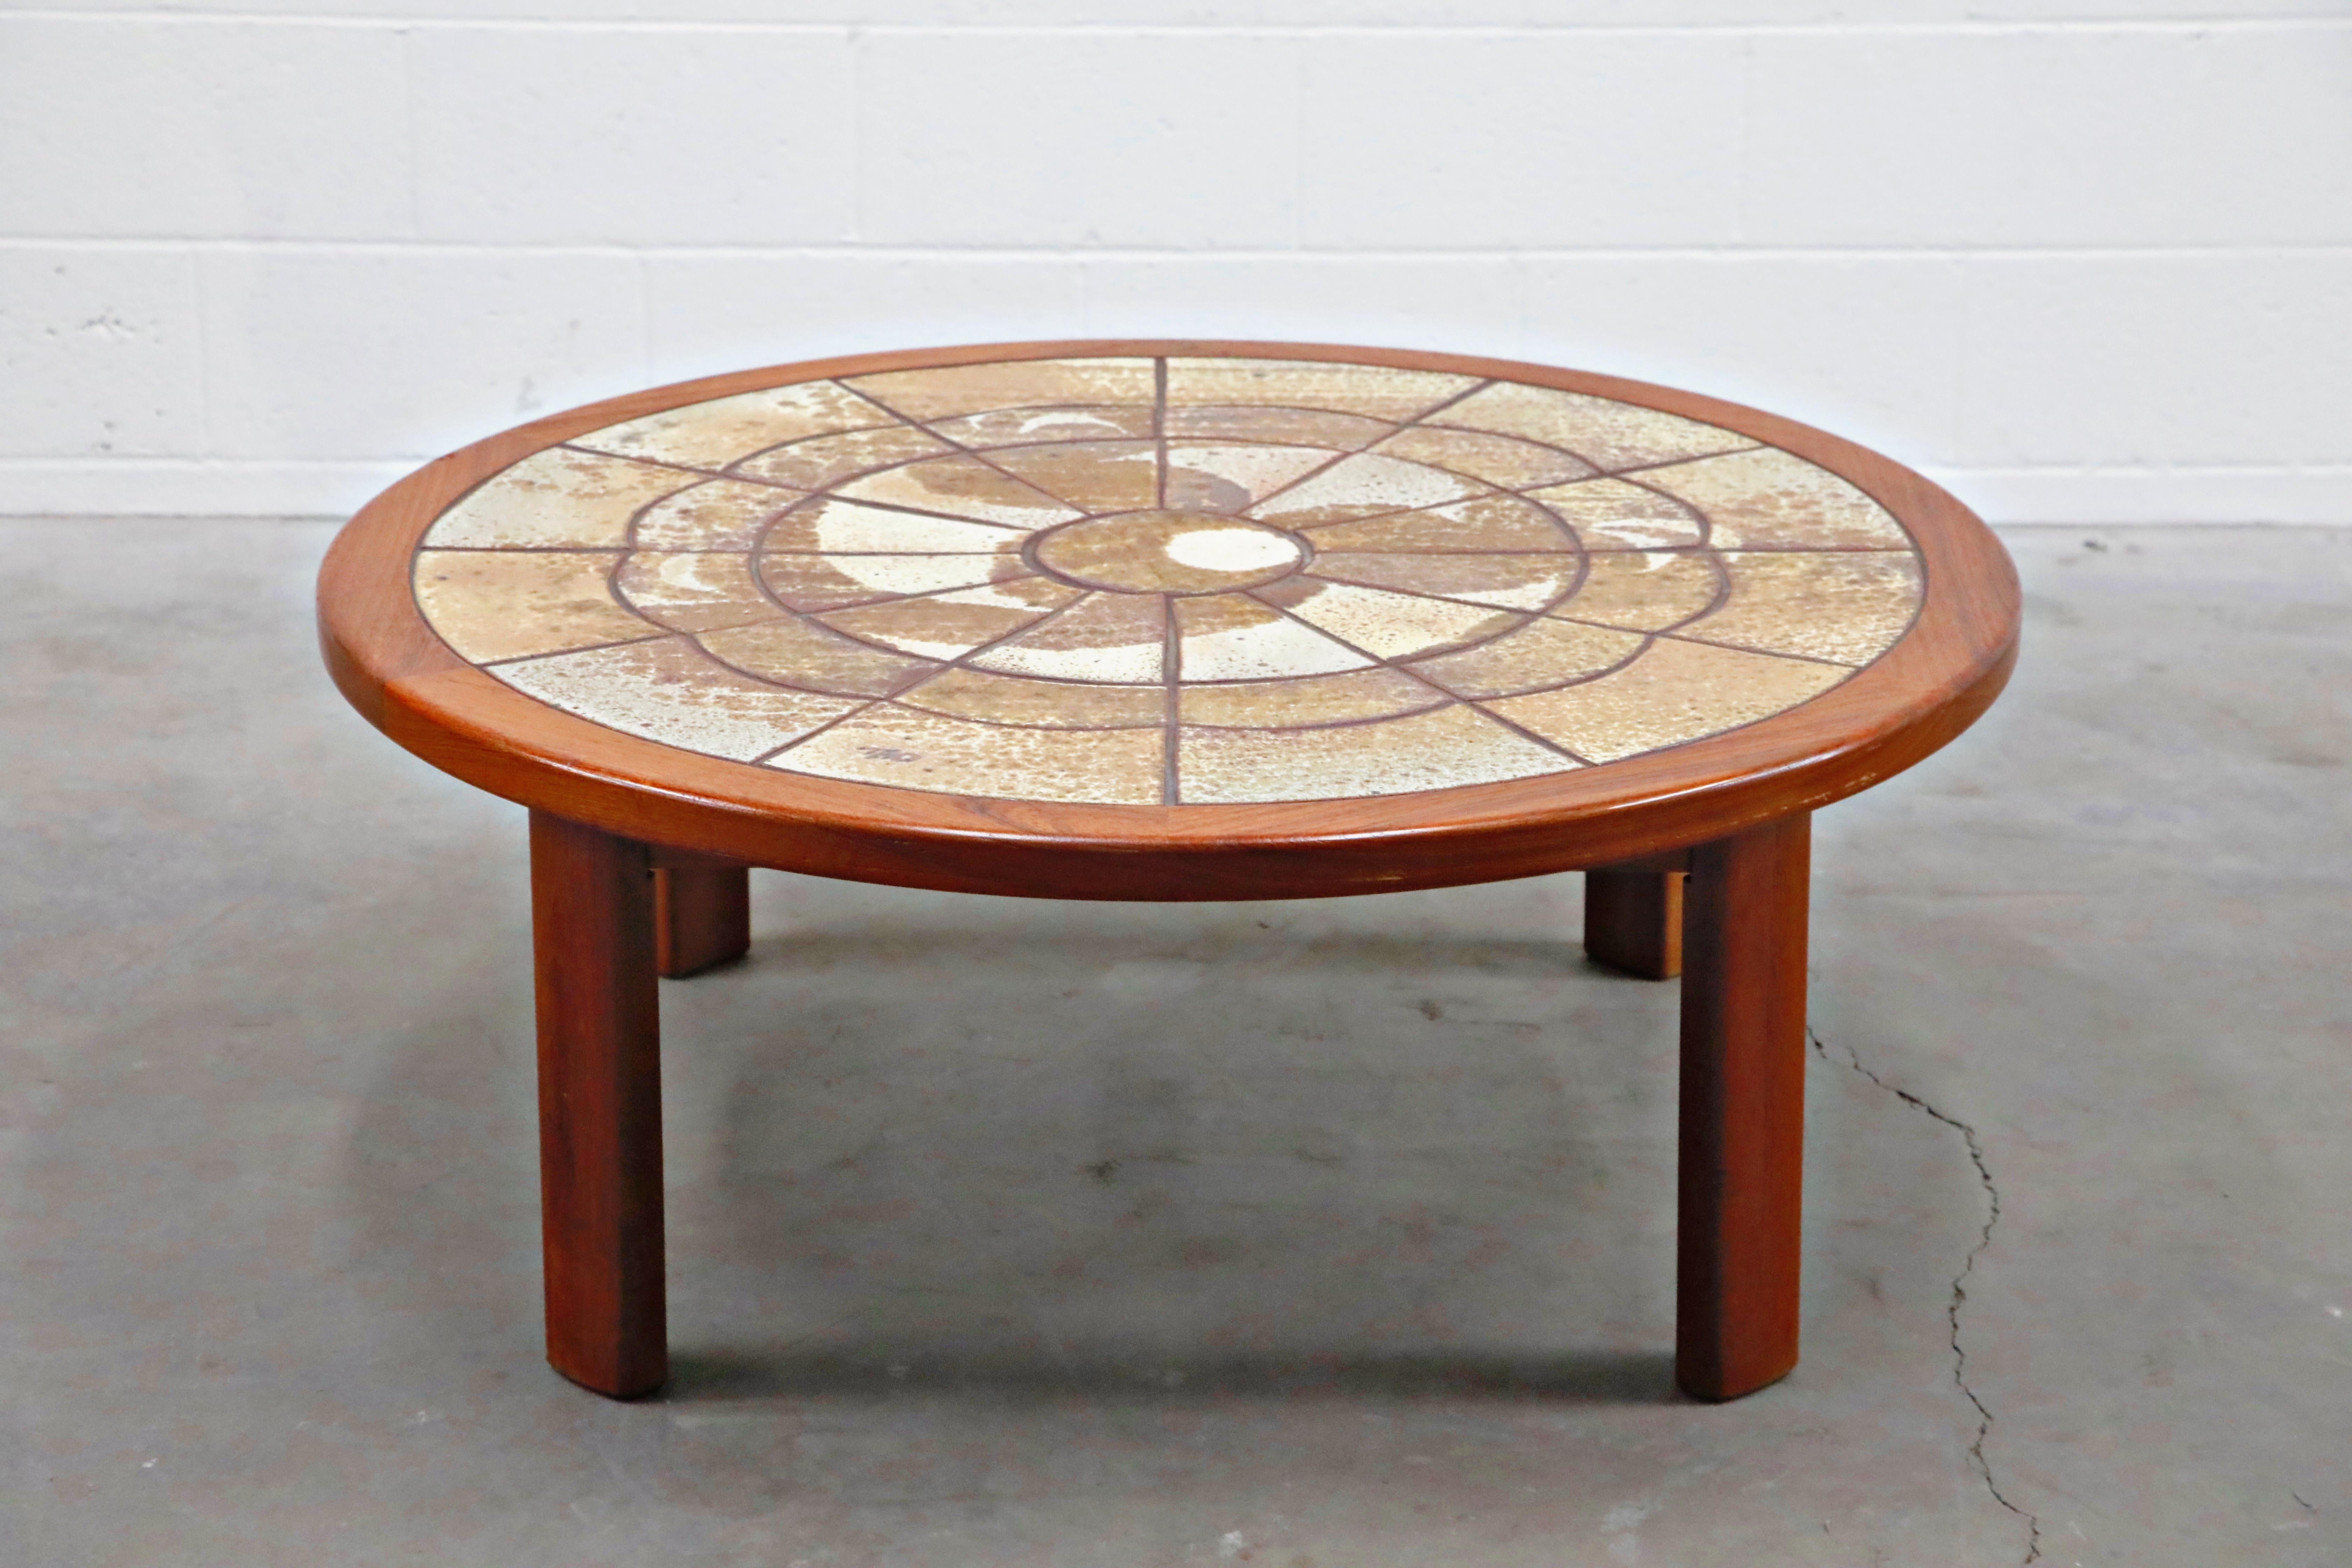 Scandinavian Modern Roger Capron Style Round Teak Coffee Table with 1960s Ceramic Tile, Signed